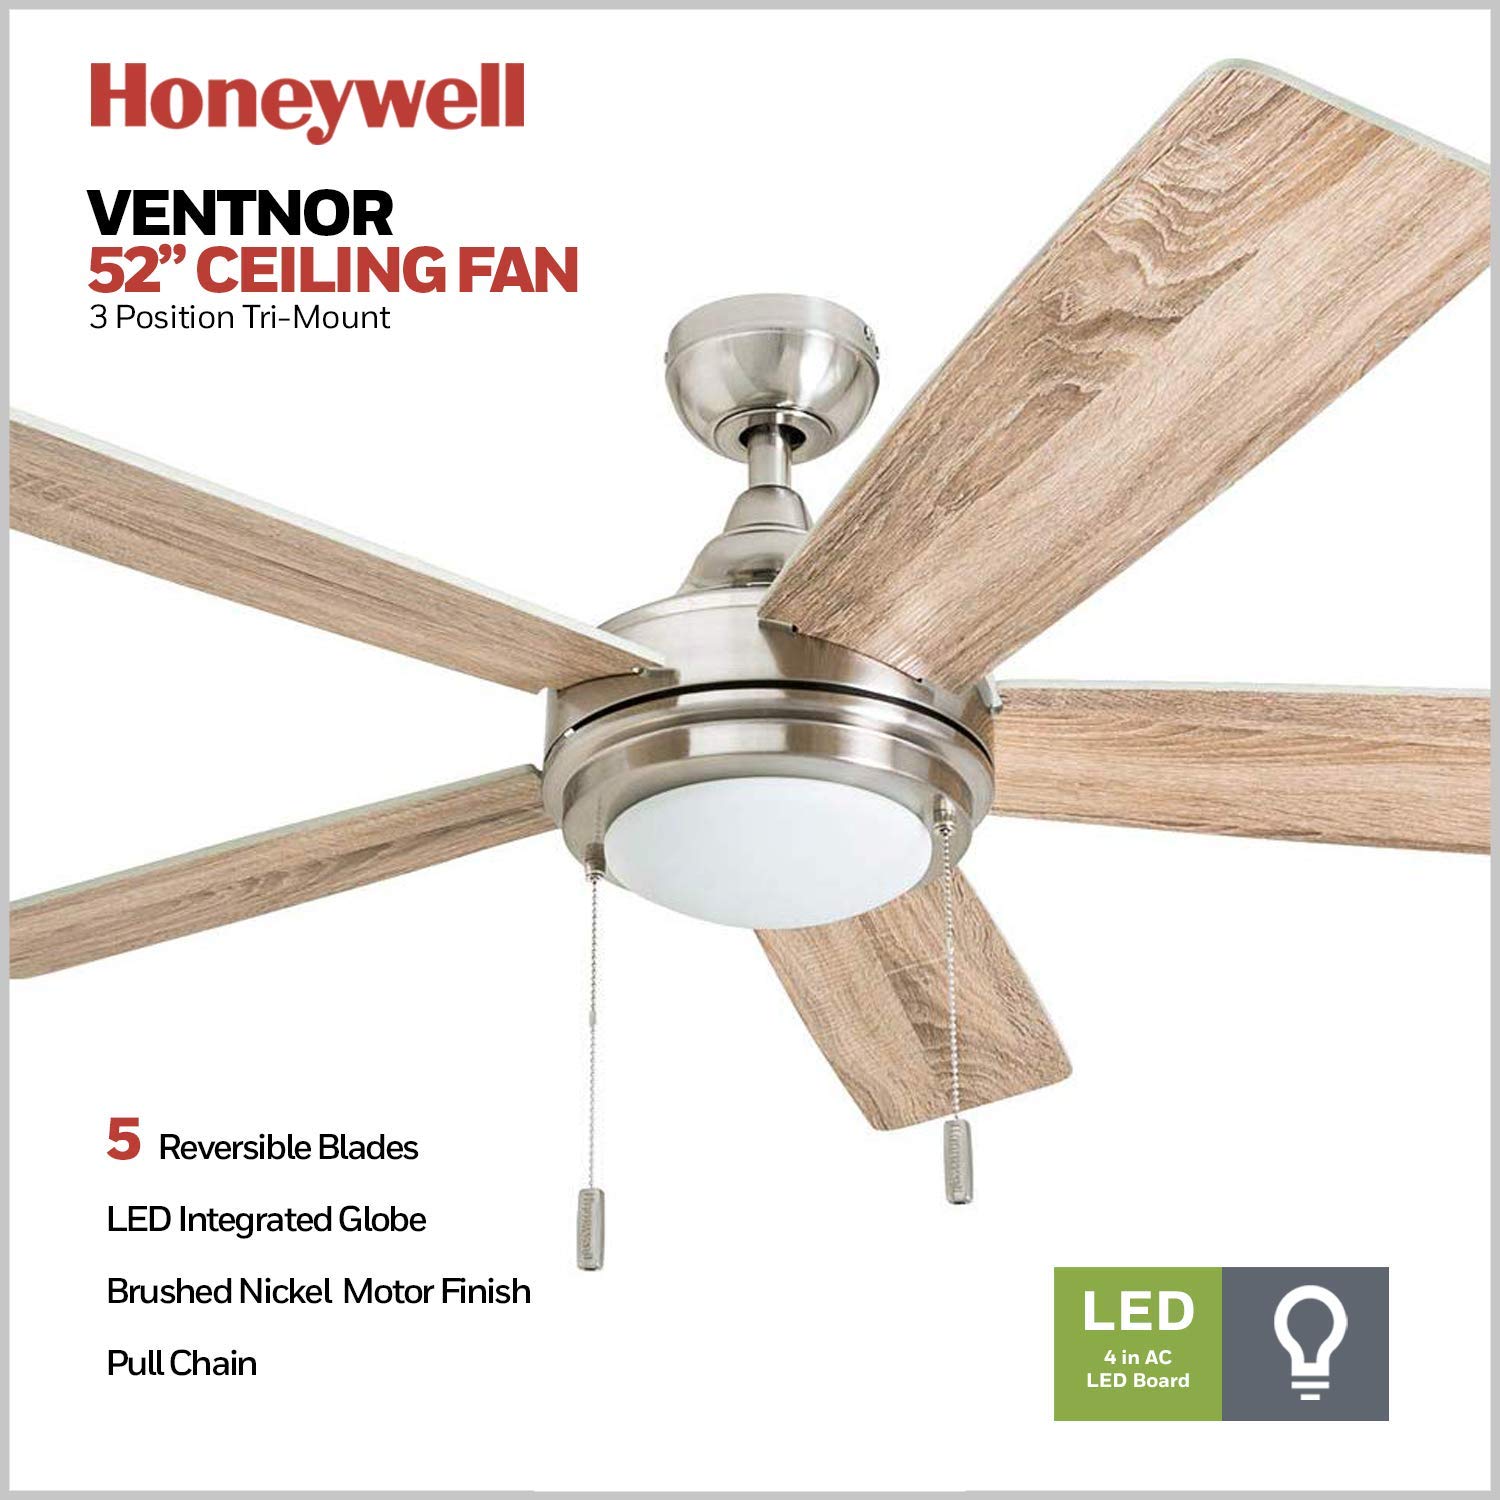 Honeywell Ceiling Fans Ventnor, 52 Inch Modern Farmhouse Indoor LED Ceiling Fan with Light, Pull Chain, Three Mounting Options, Dual Finish Blades, Reversible Motor - 50606-01 (Brushed Nickel)